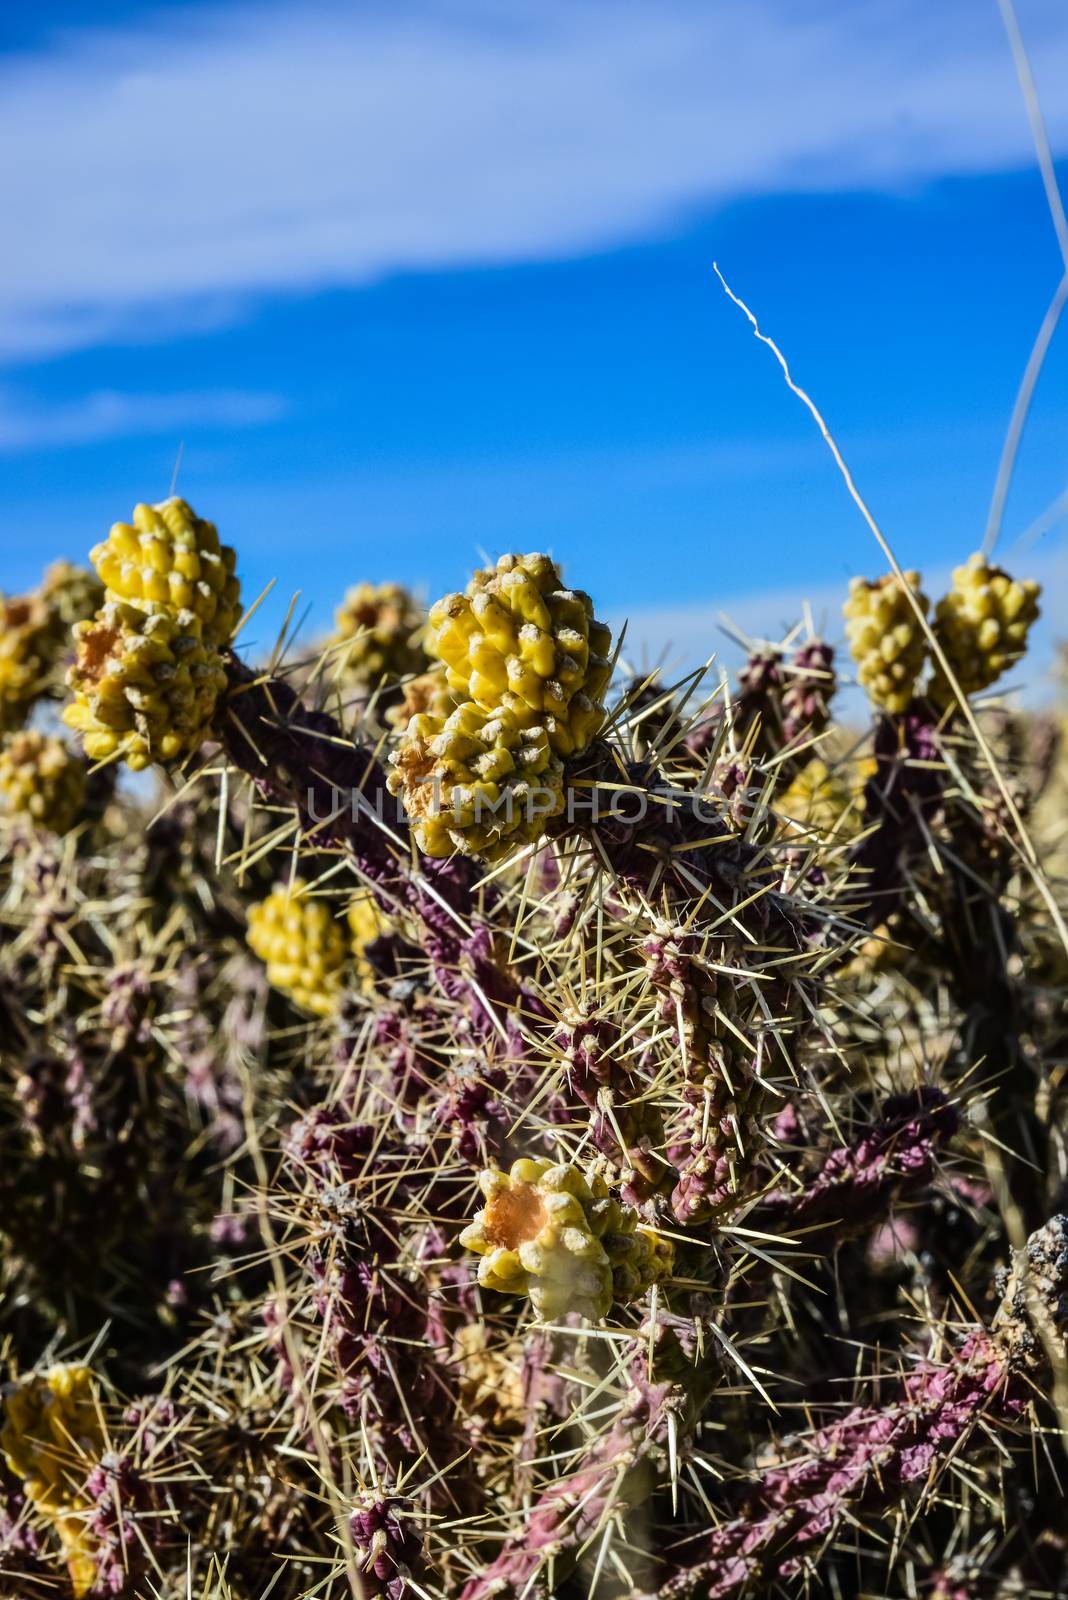 (Cylindropuntia versicolor) Prickly cylindropuntia with yellow fruits with seeds. Arizona cacti, USA